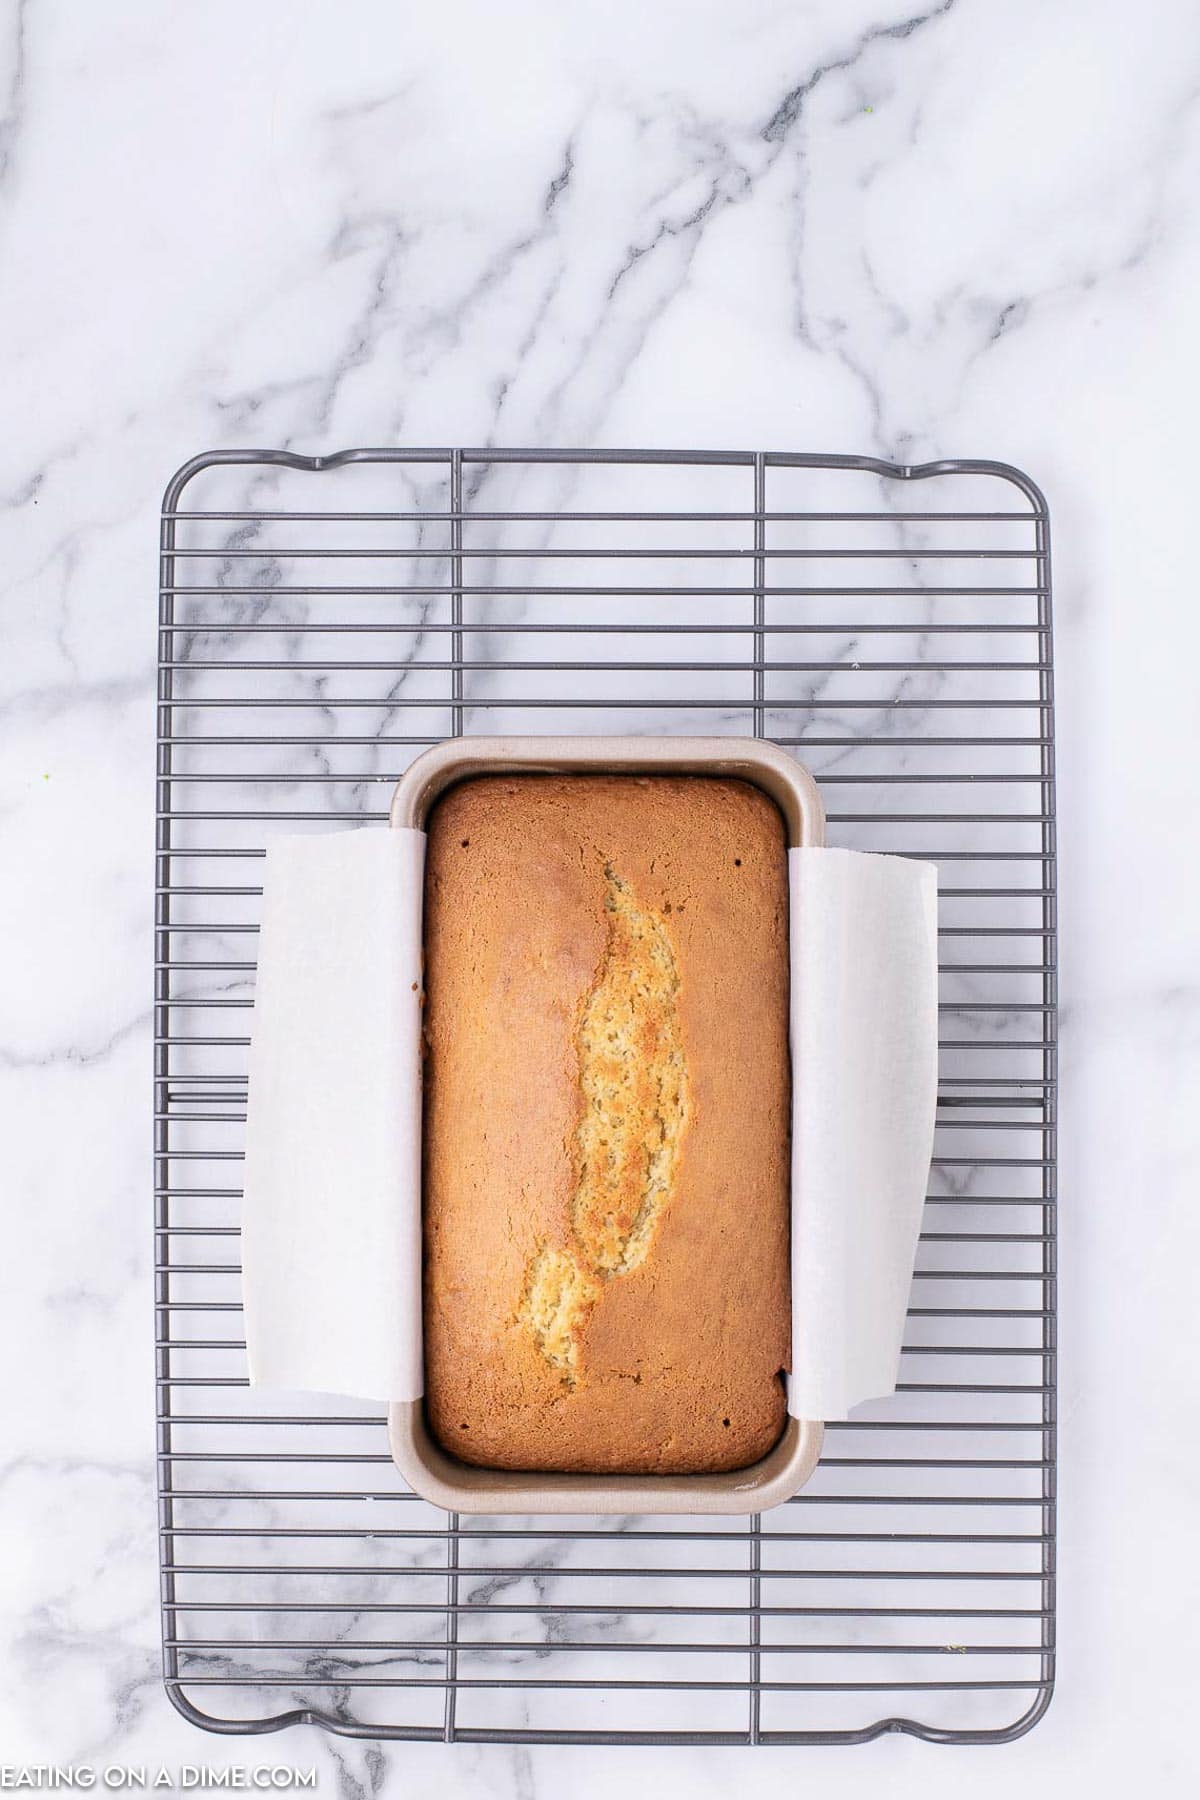 Baked lemon loaf in a loaf pan lined with parchment paper on a wire rack